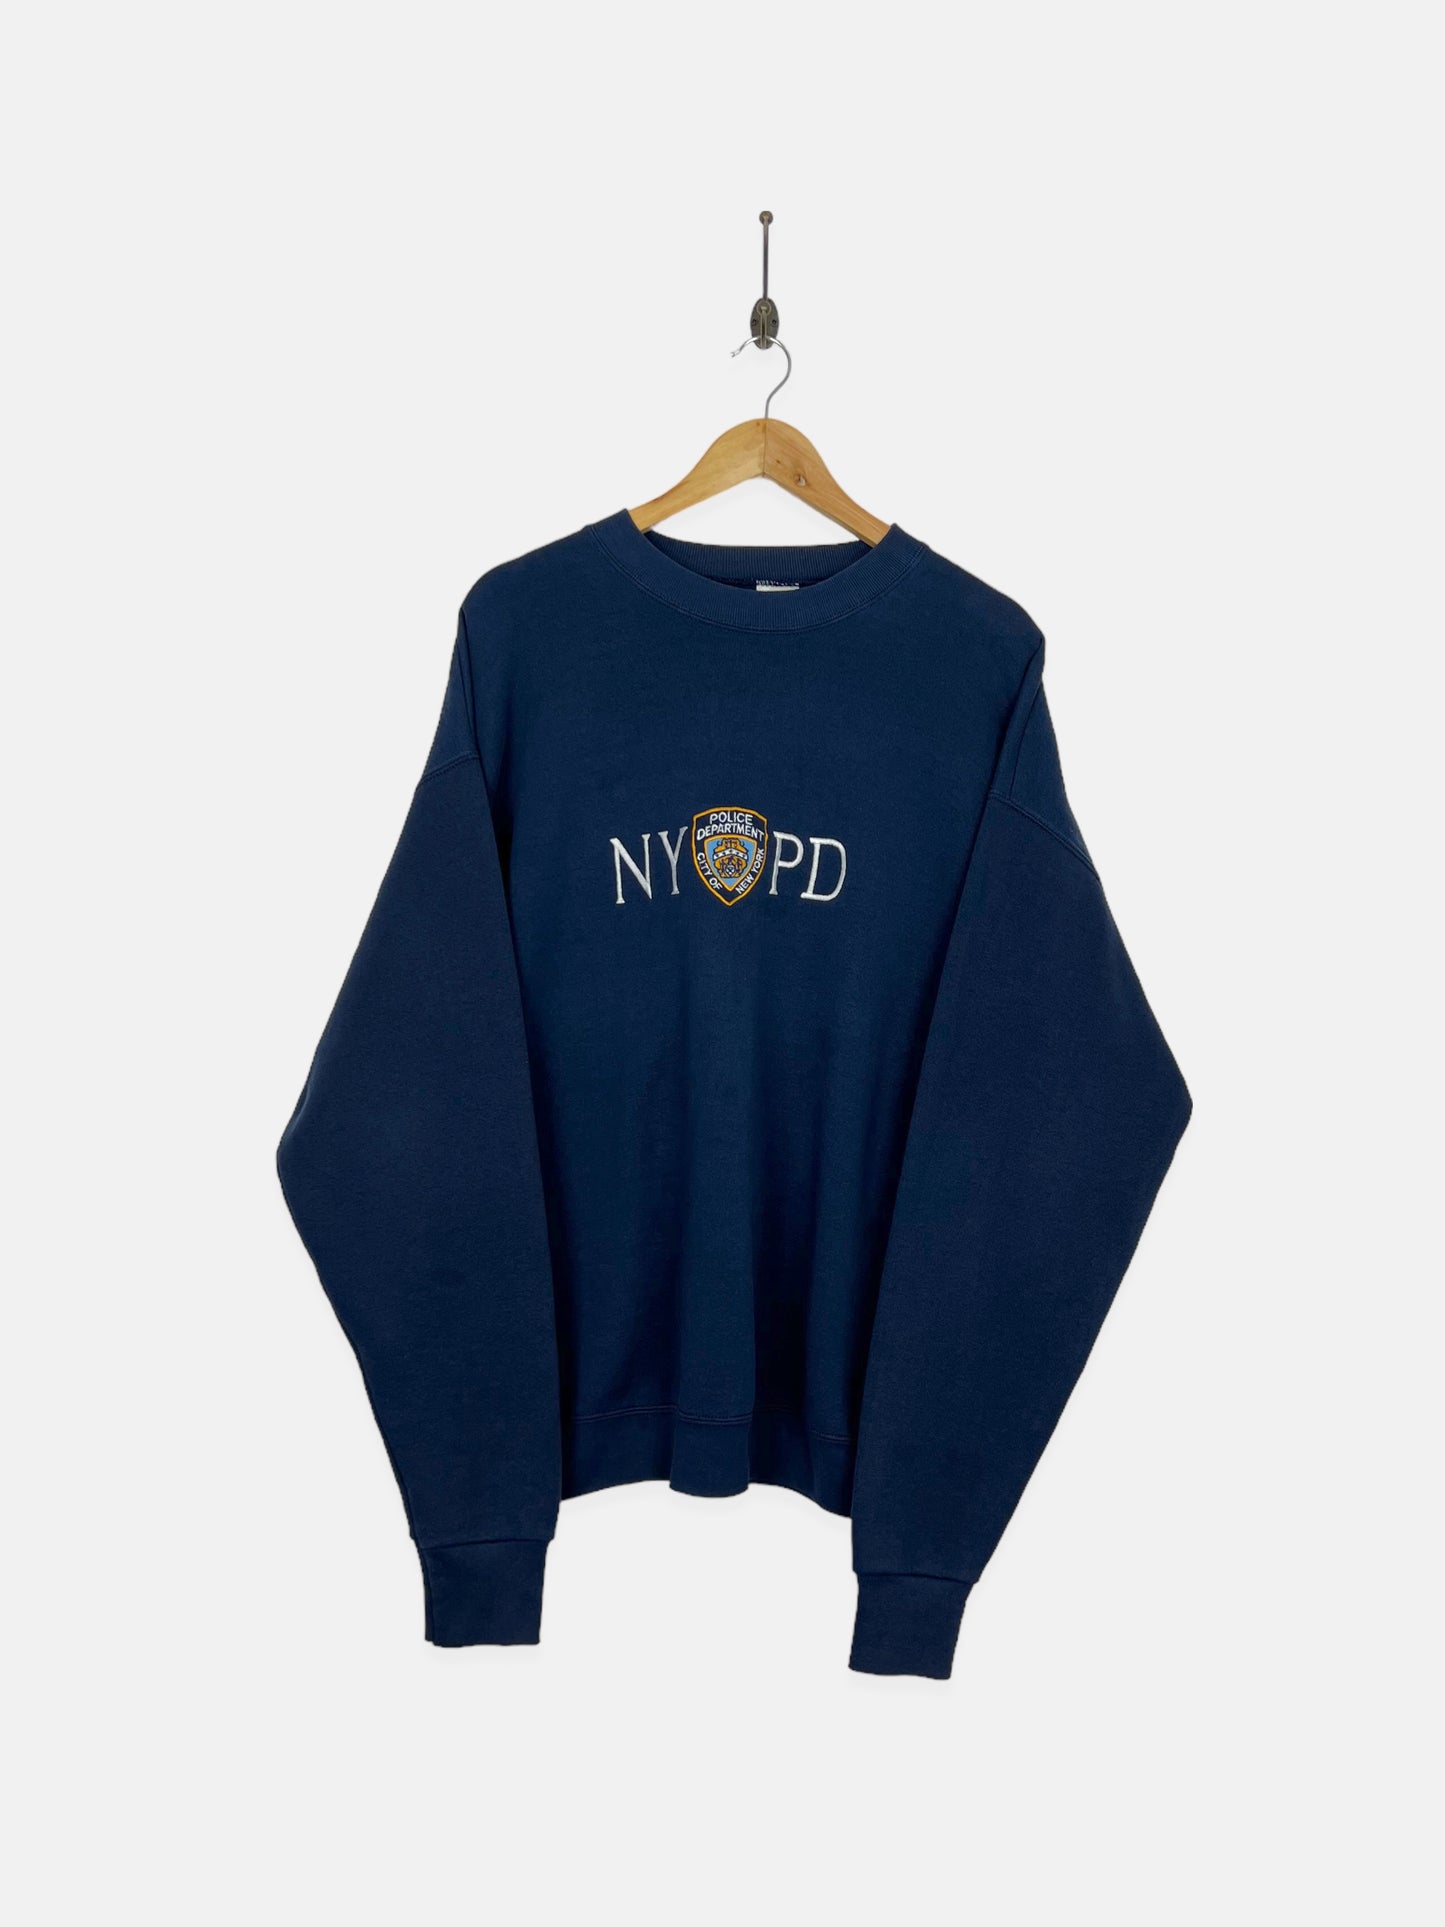 90's NYPD Embroidered Vintage Sweatshirt Size L-XL